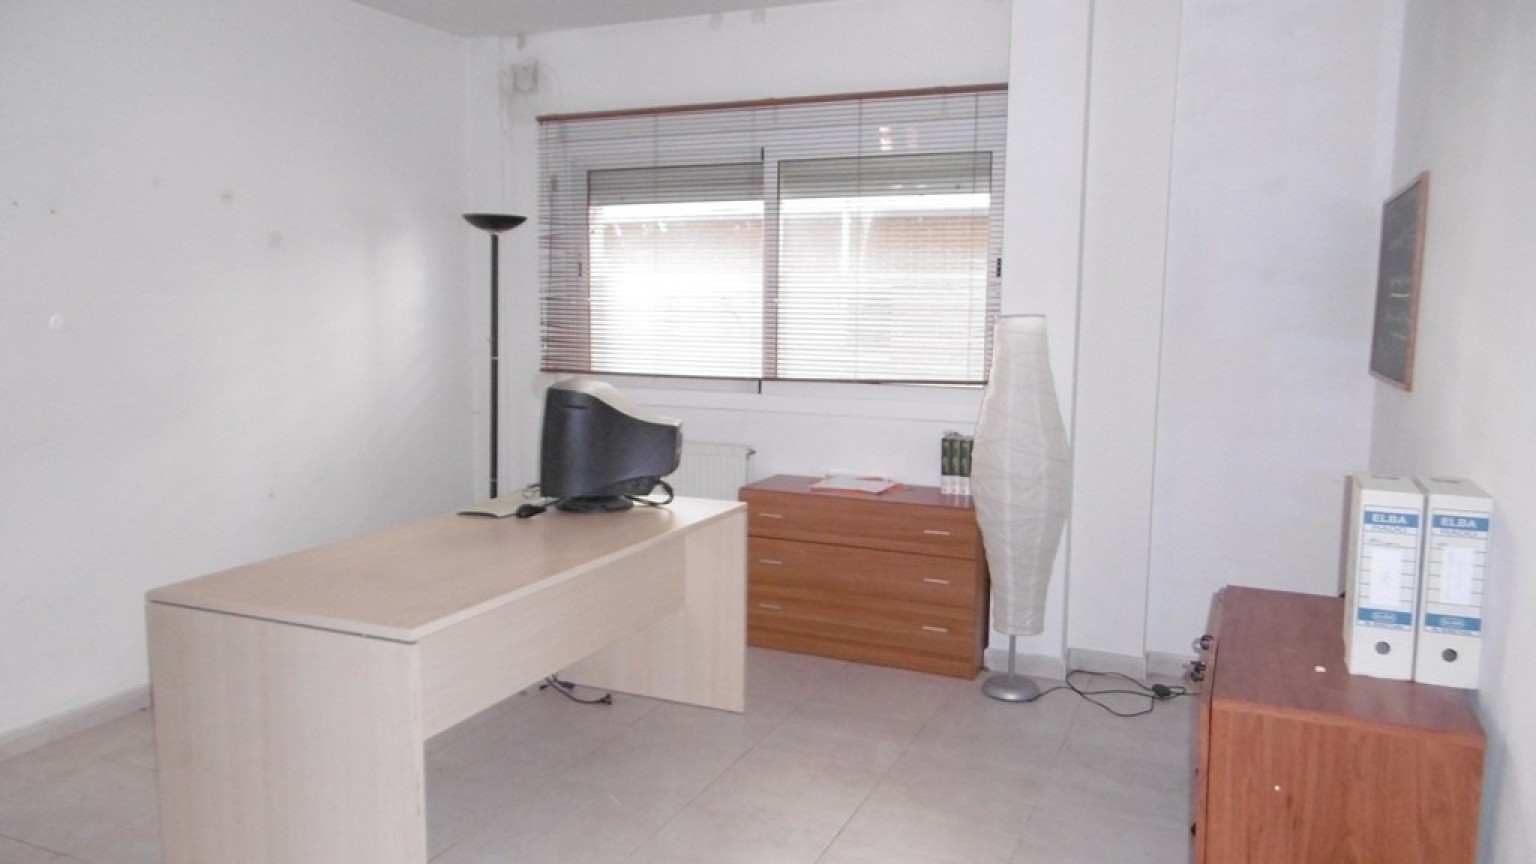 One bedroom apartment for sale, Horta Capallera area.